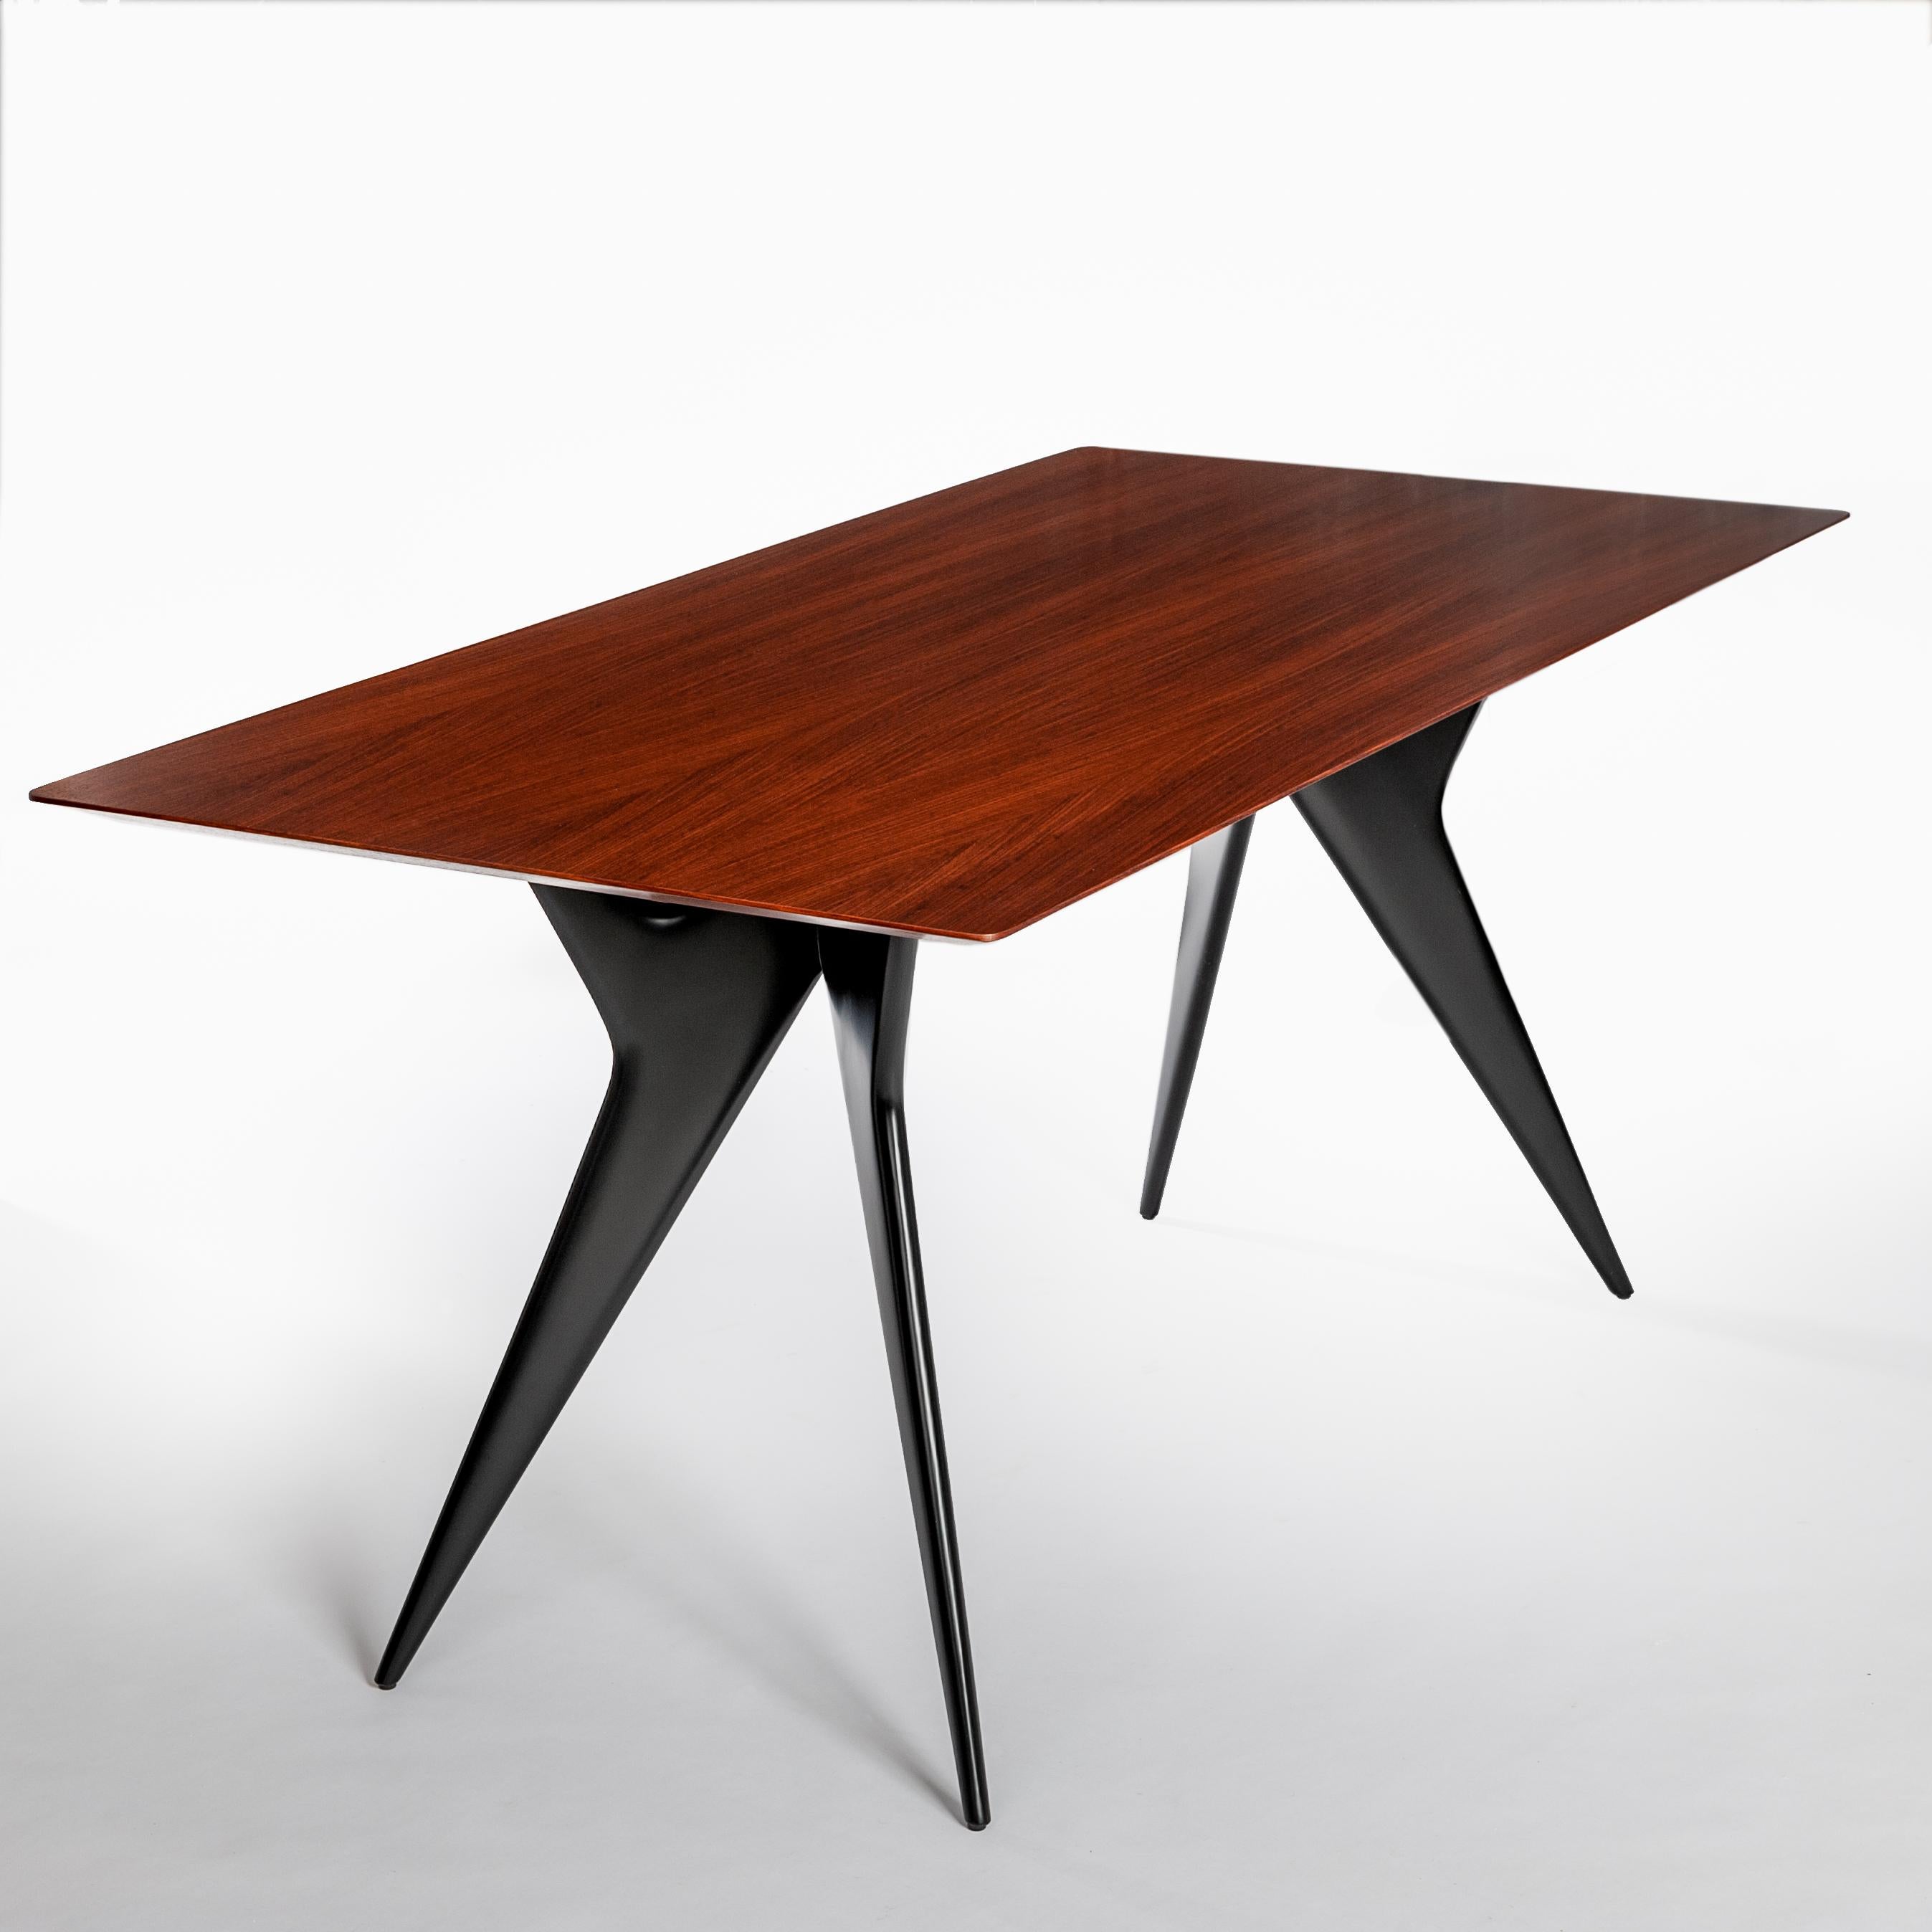 The dining table or desk by the architect and designer Ico Parisi is from the early 1950s
produced by MIM - Mobili Italiani Moderni
Characteristics: flared, tapered leg guides, table top only 4 mm towards the edge -
the whole object has no sharp